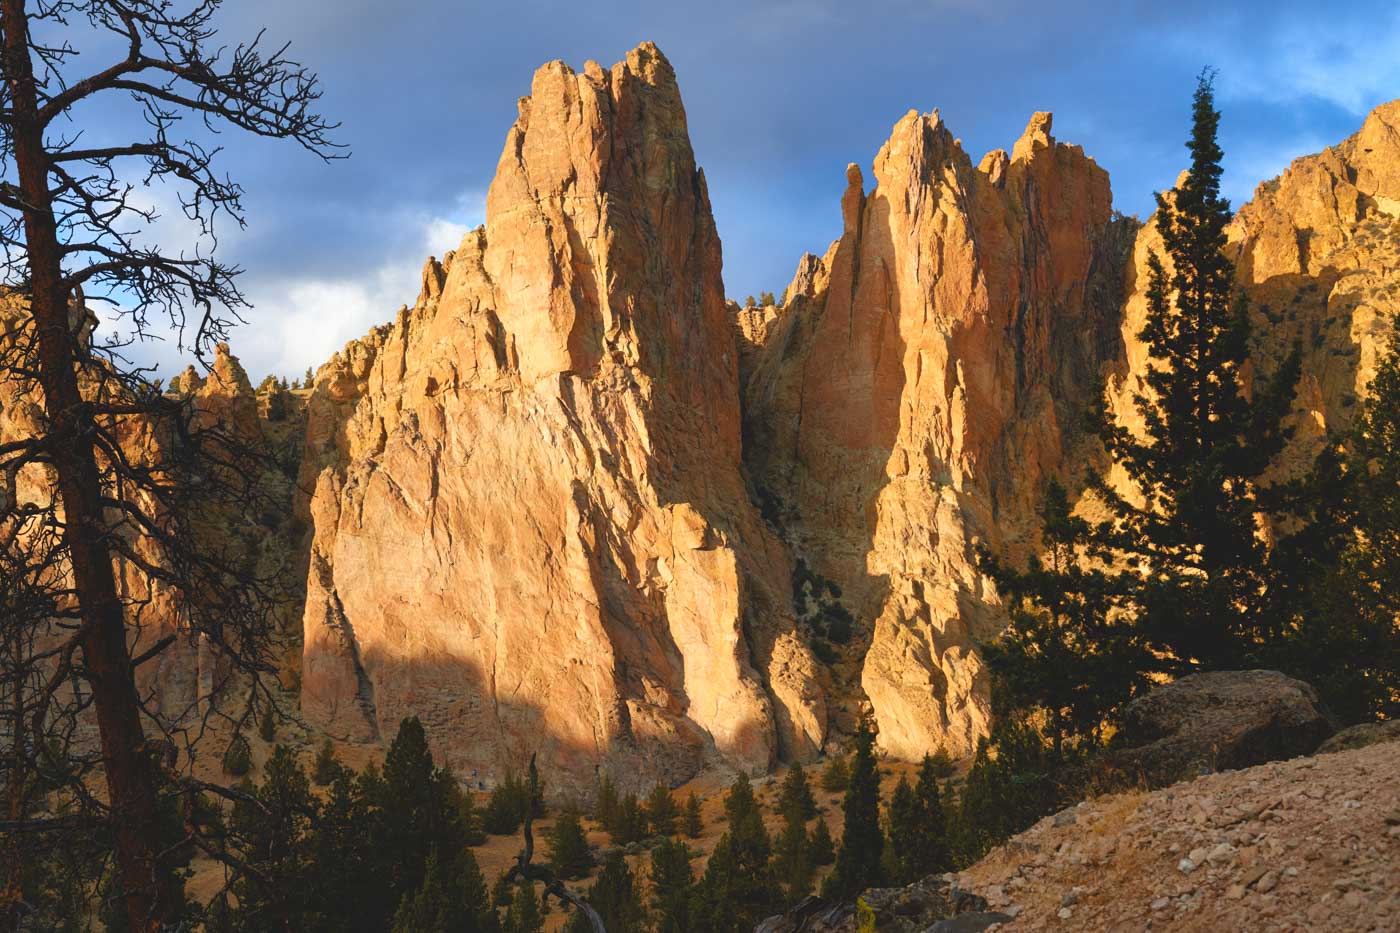 A View of the Monument at Smith Rock State Park.